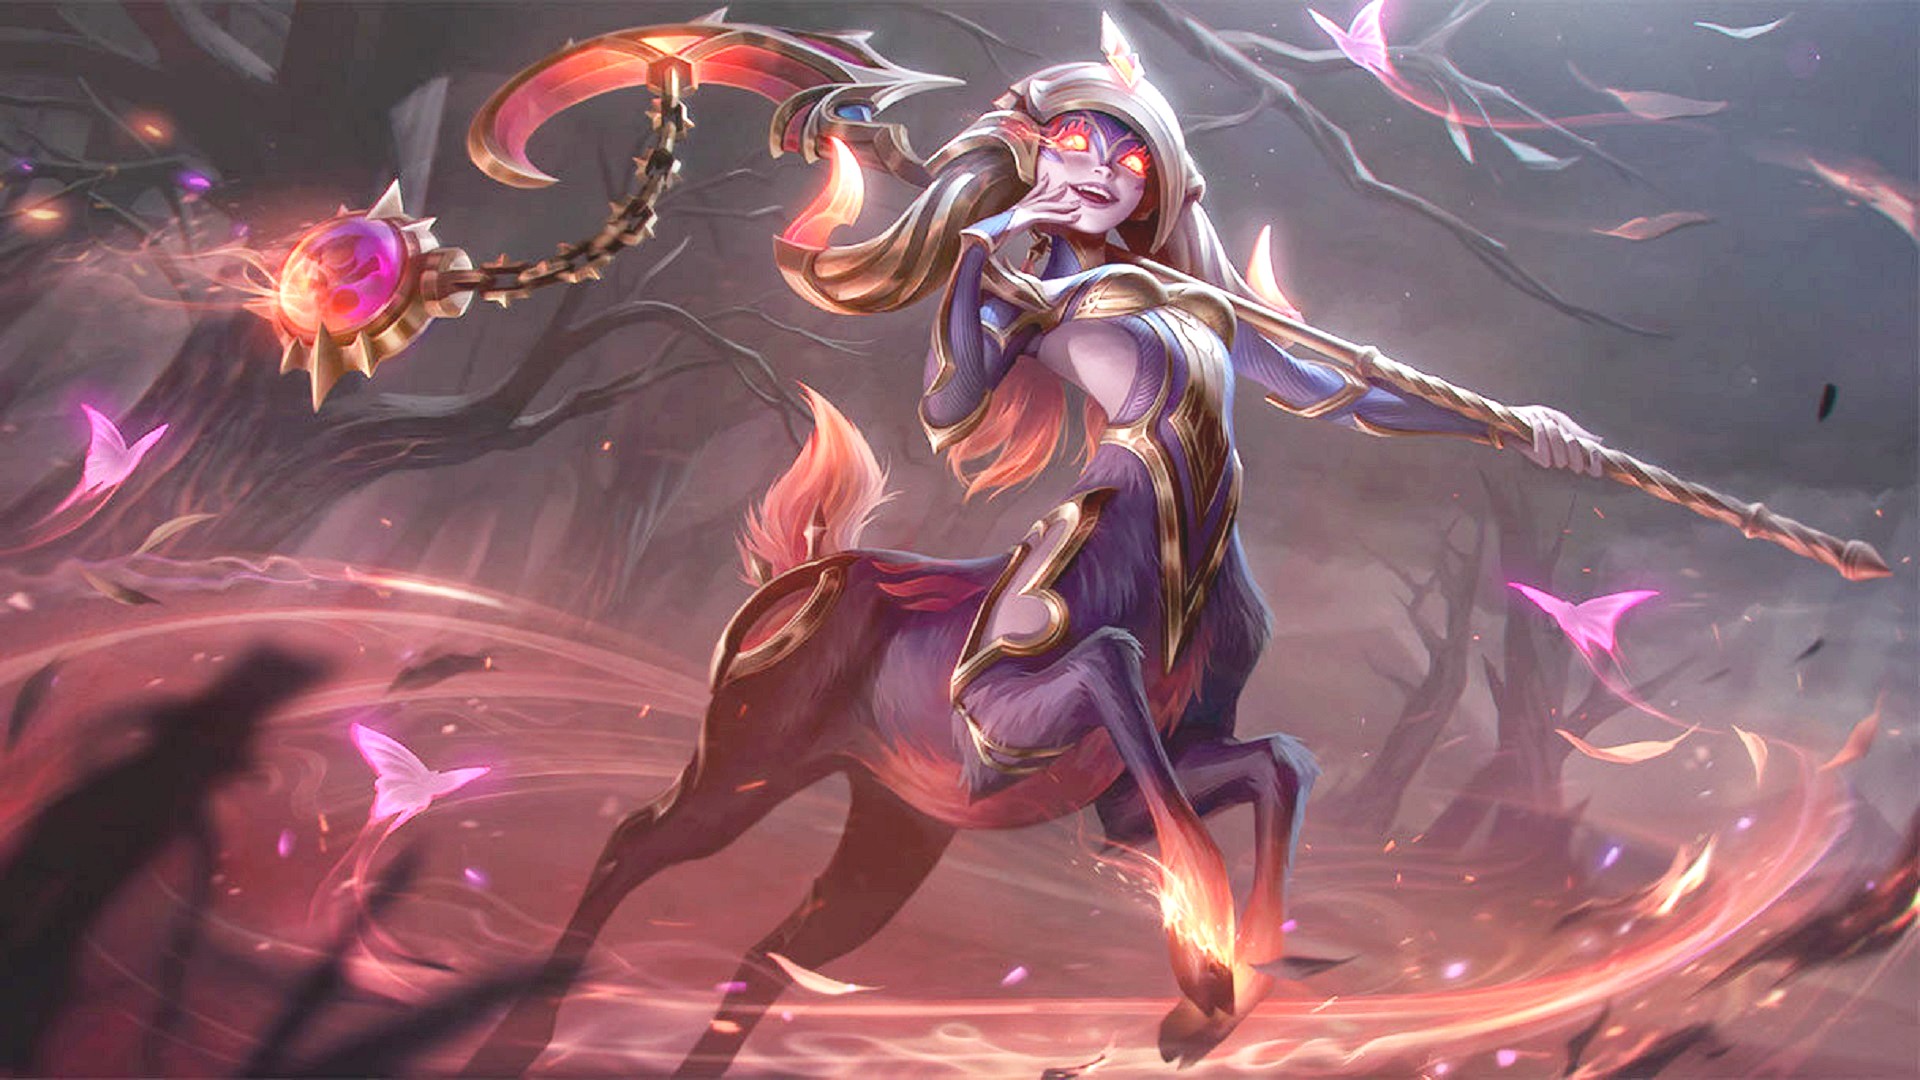 League of Legends Lillia combo in Ultimate Spellbook is totally OP